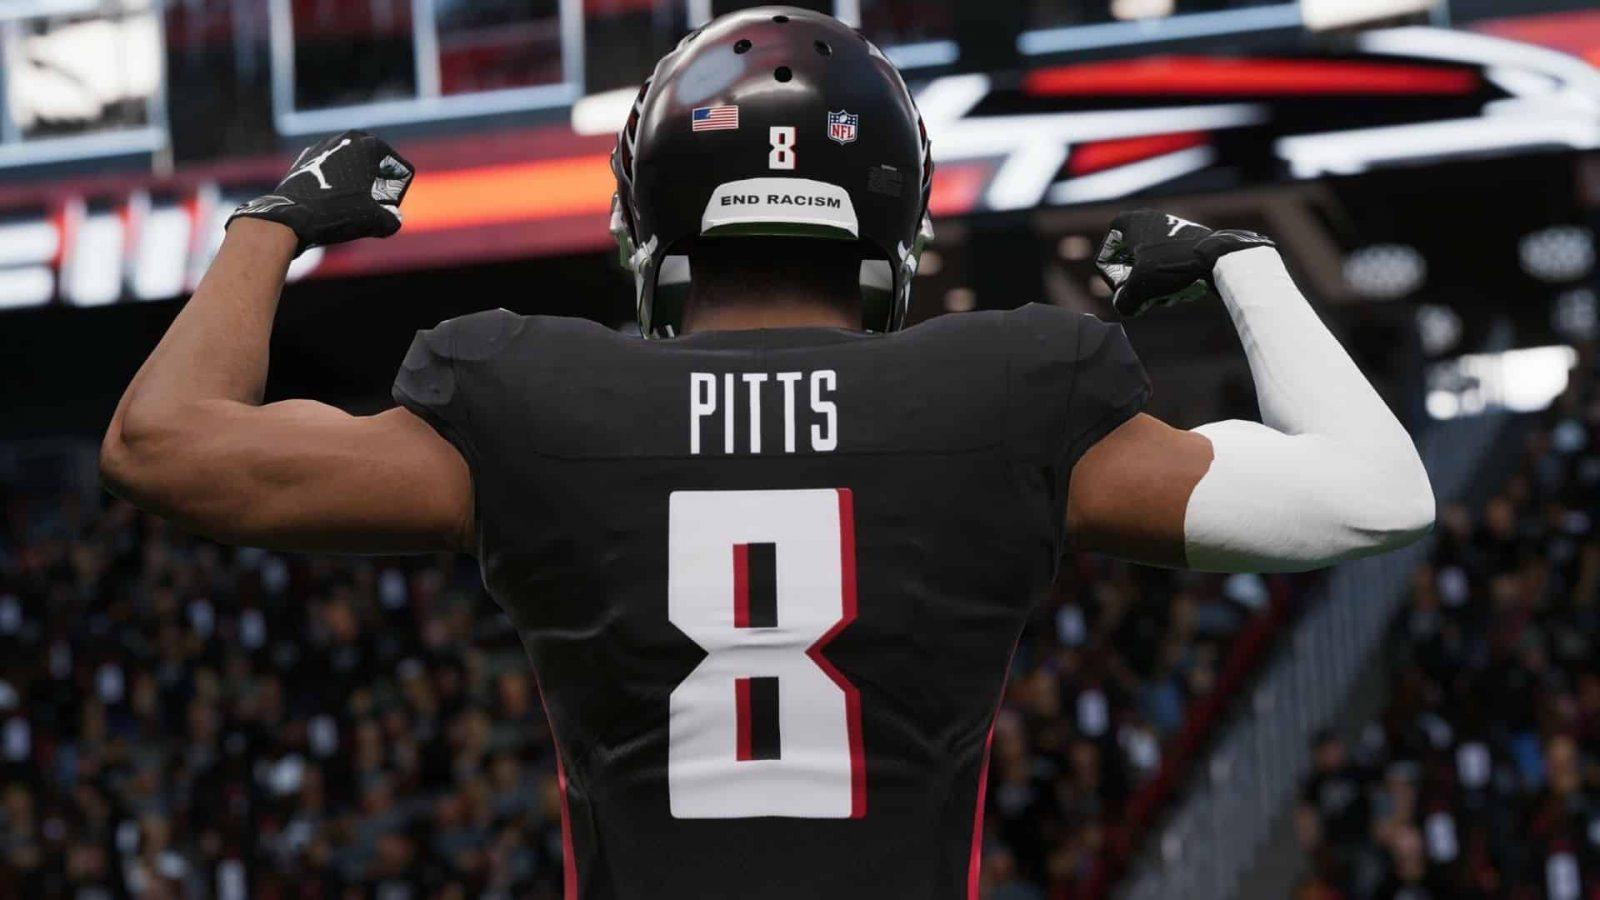 madden 22 player ratings